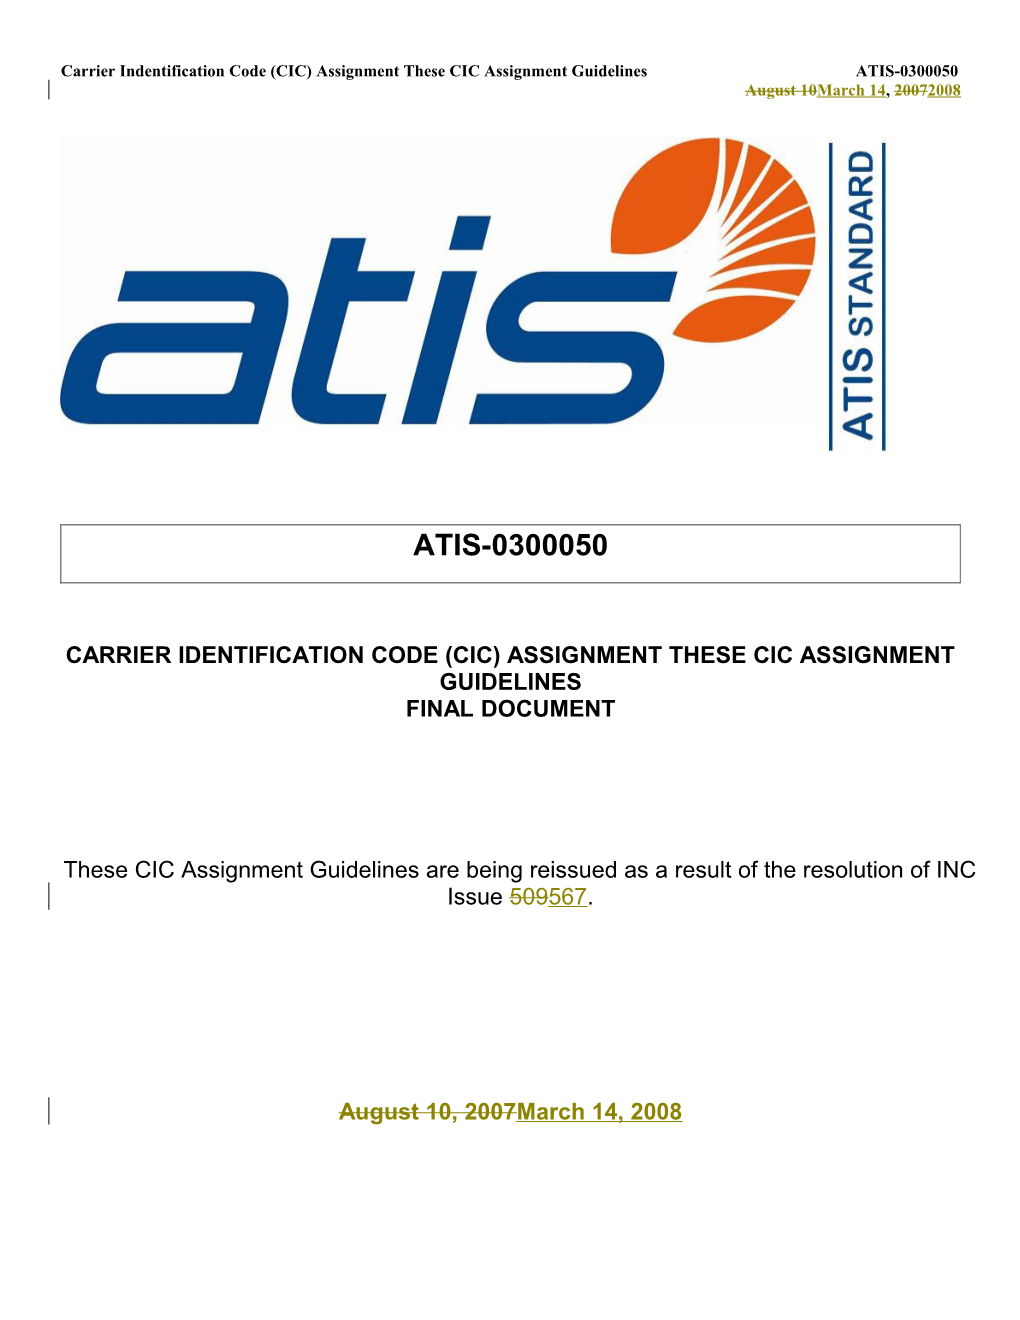 Carrier Identification Code Assignment Guidelines s1